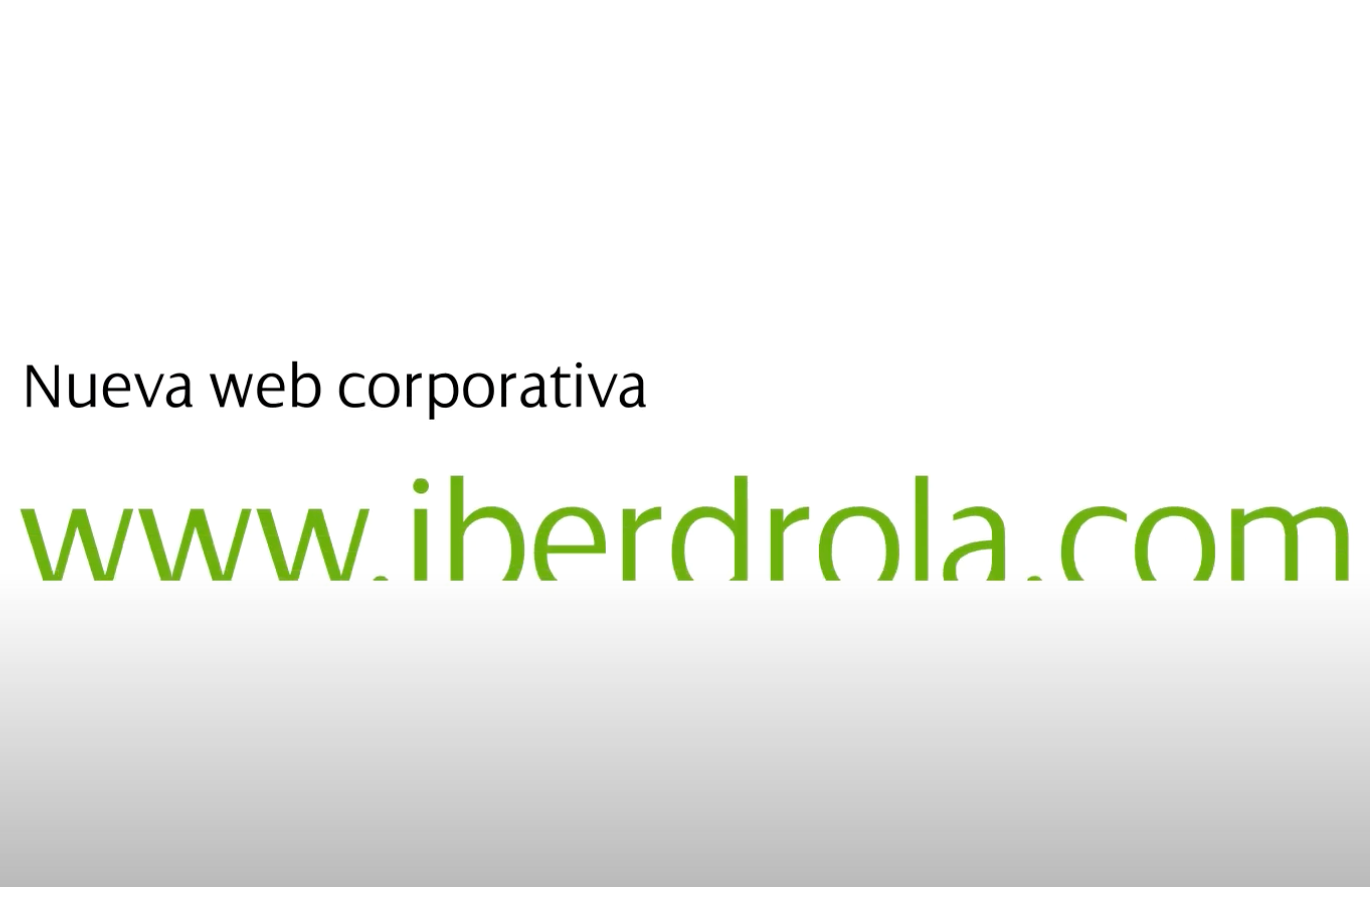 Iberdrola launches its new website reinforcing its global leadership in the energy transition